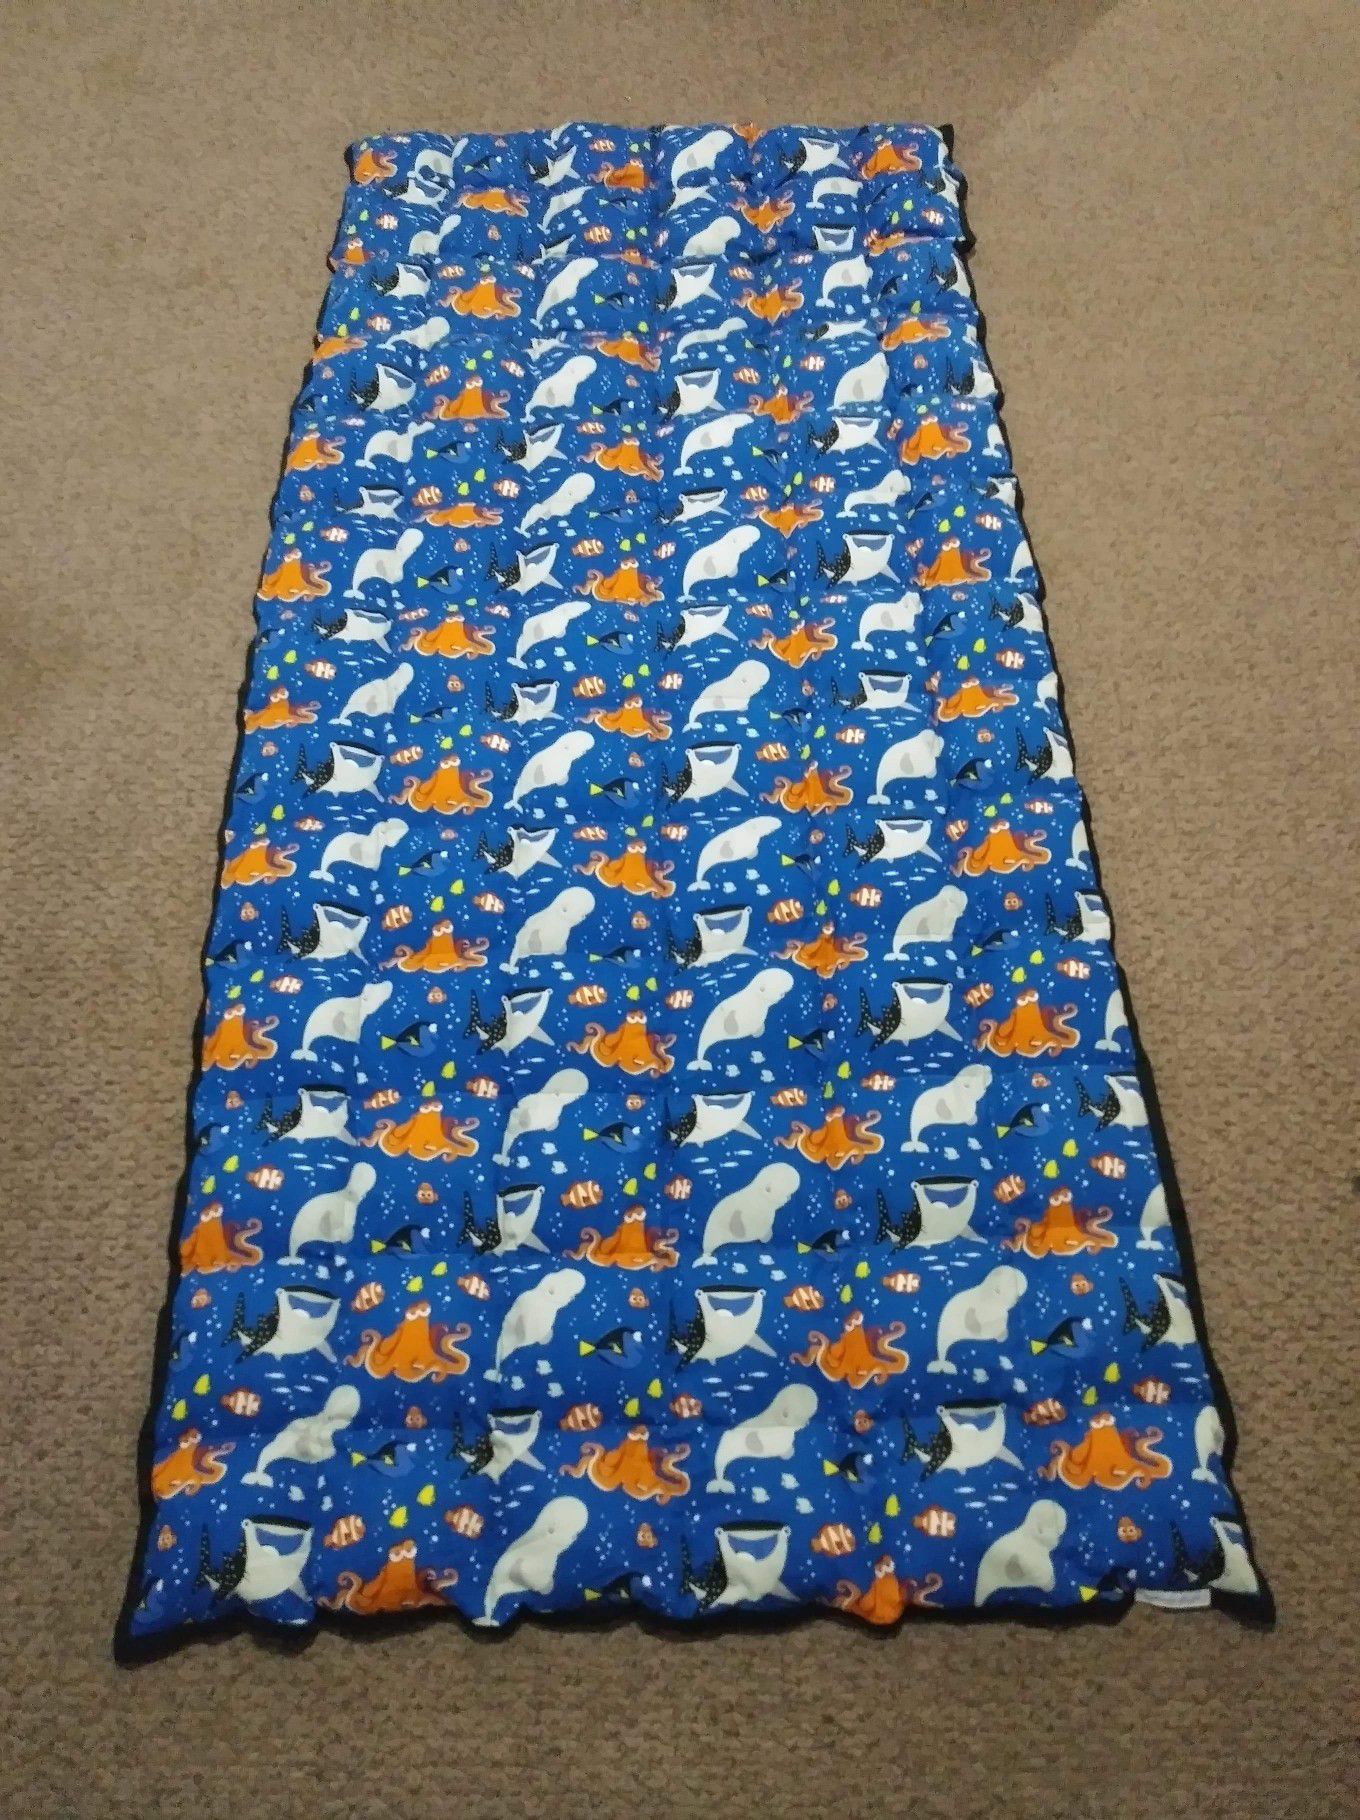 Finding dory weighted blanket